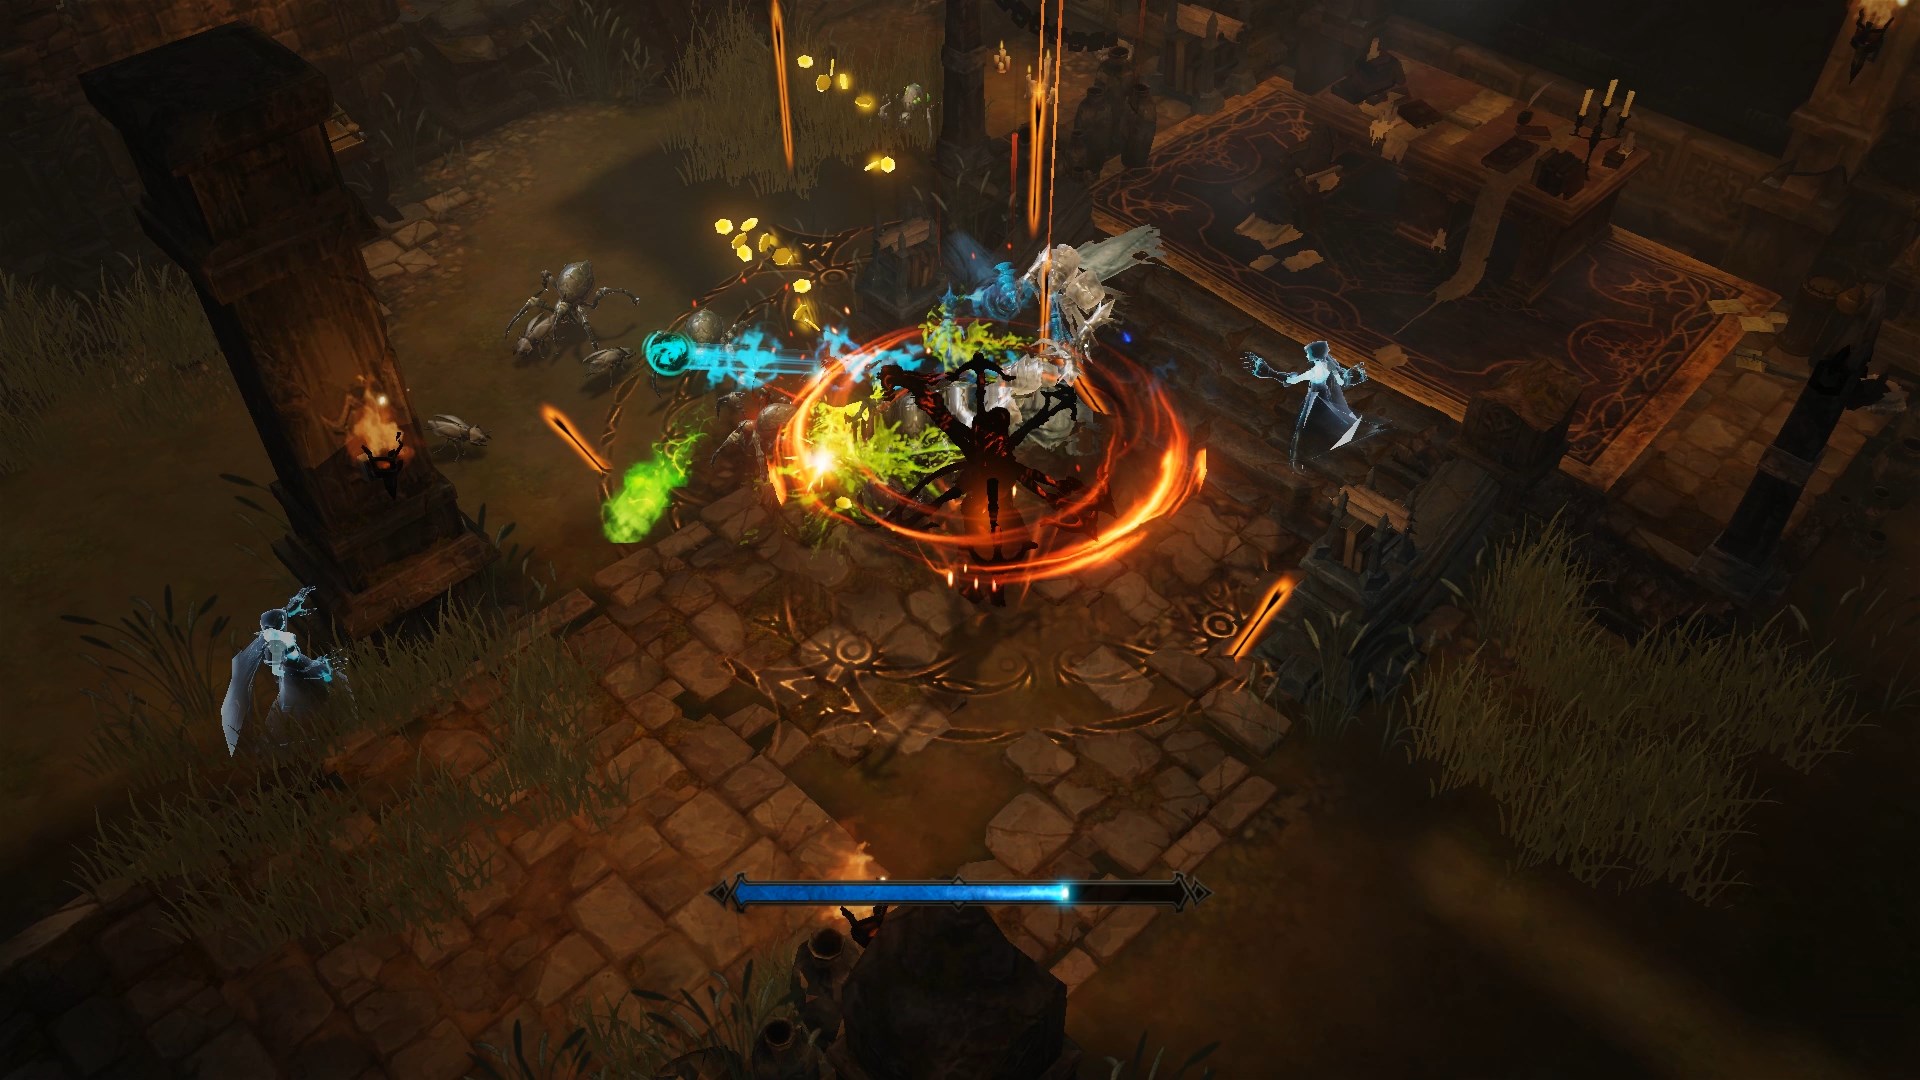 Diablo Immortal' and the Paternalistic Futility of Video Game Loot